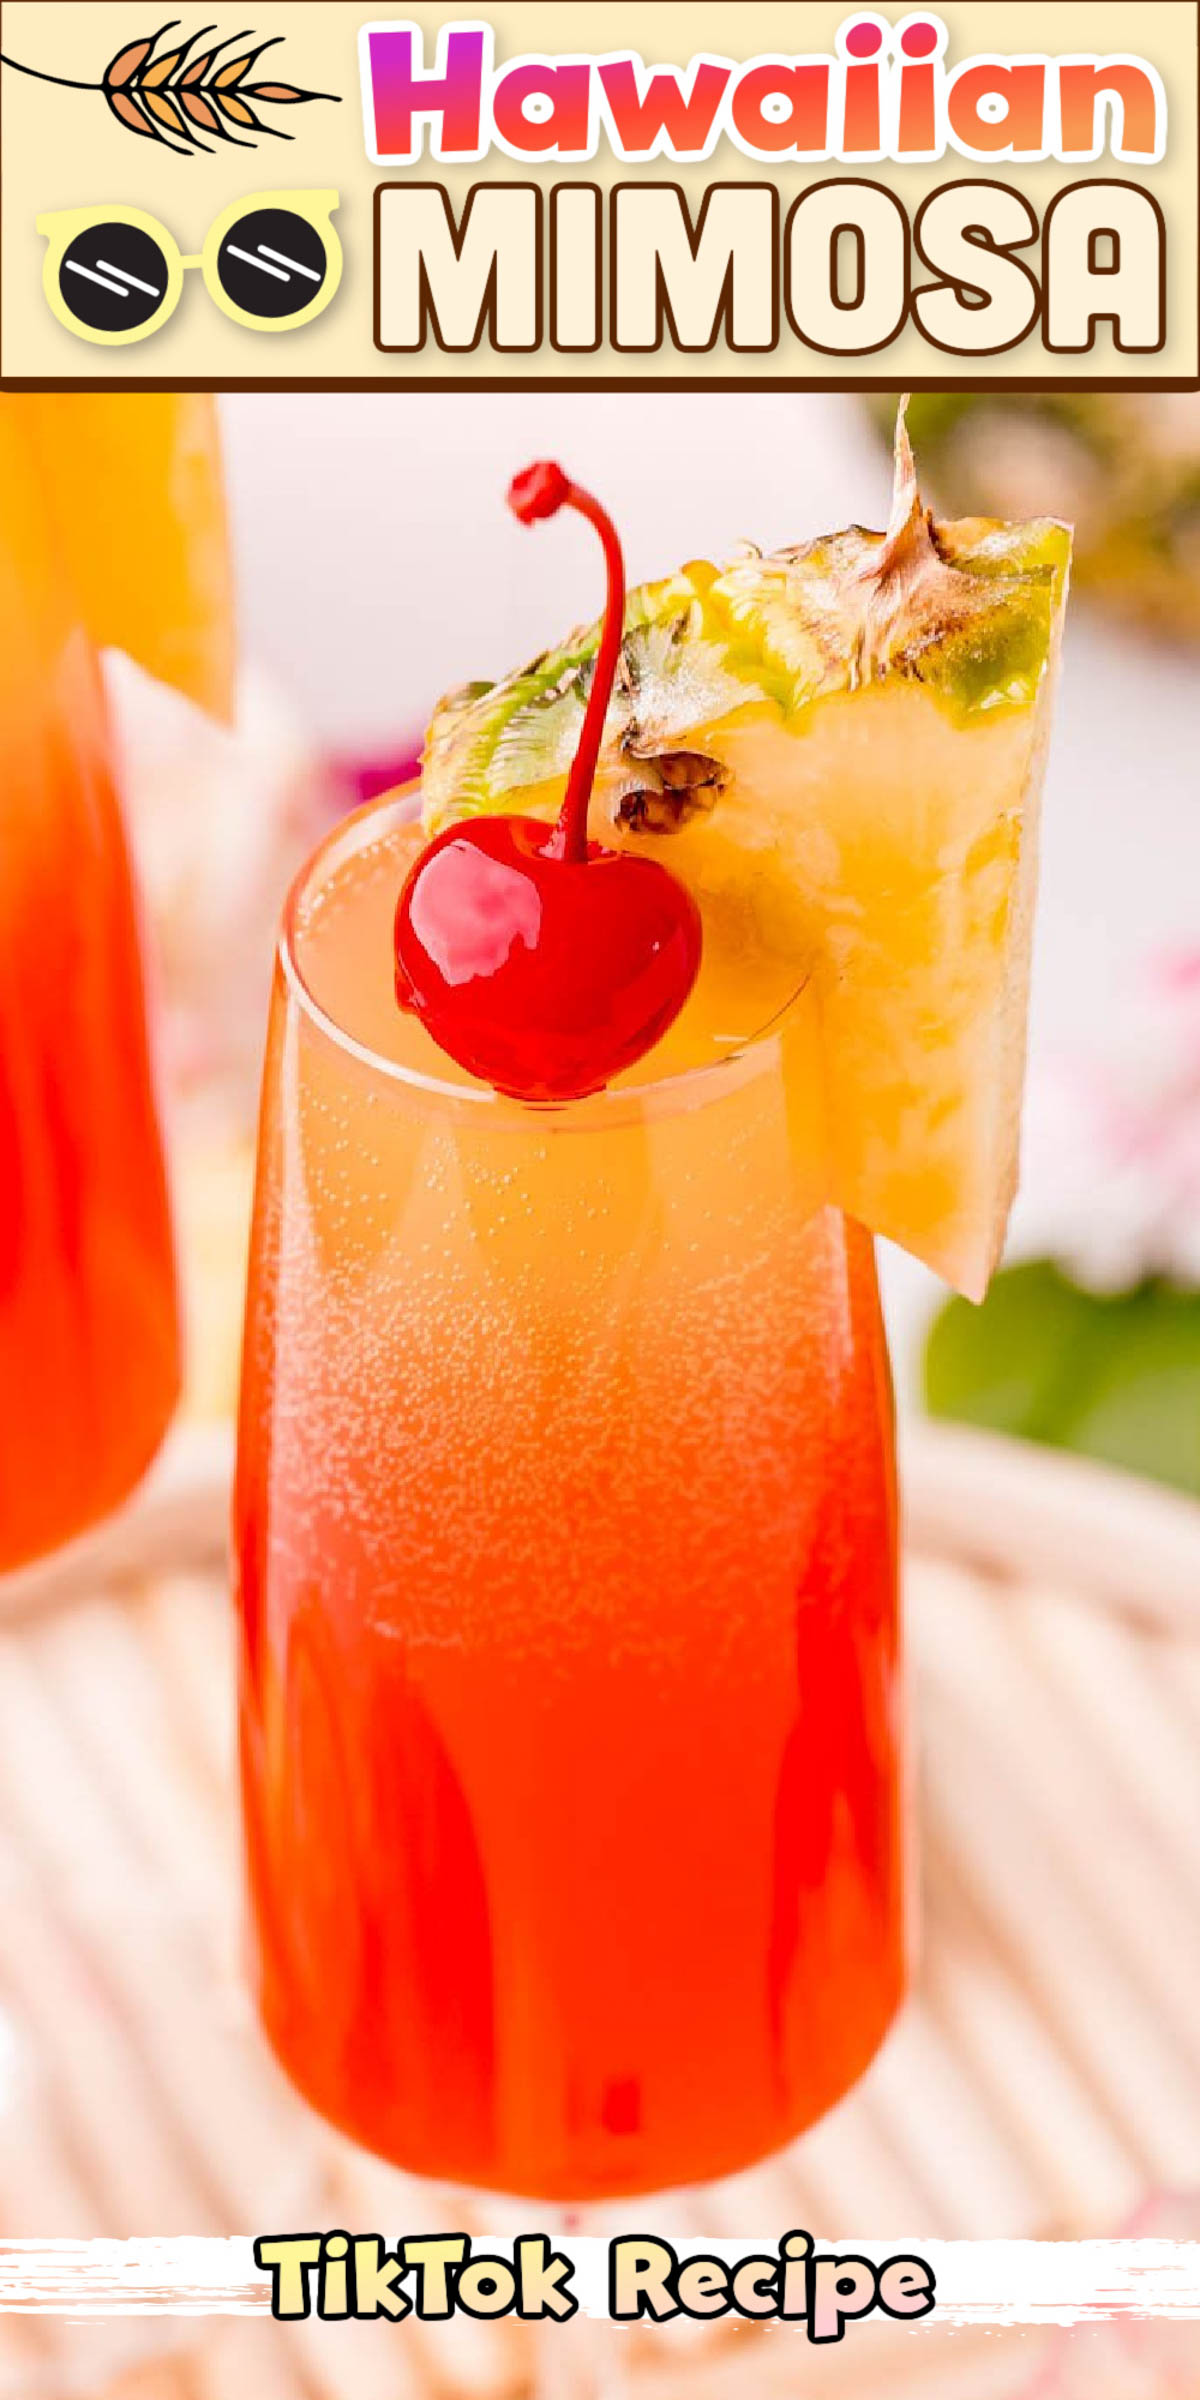 This Hawaiian Mimosa is made with prosecco, coconut rum, pineapple juice, and grenadine. It's light, sweet, fruity, and downright delicious - no wonder it's gone viral on TikTok! via @sugarandsoulco